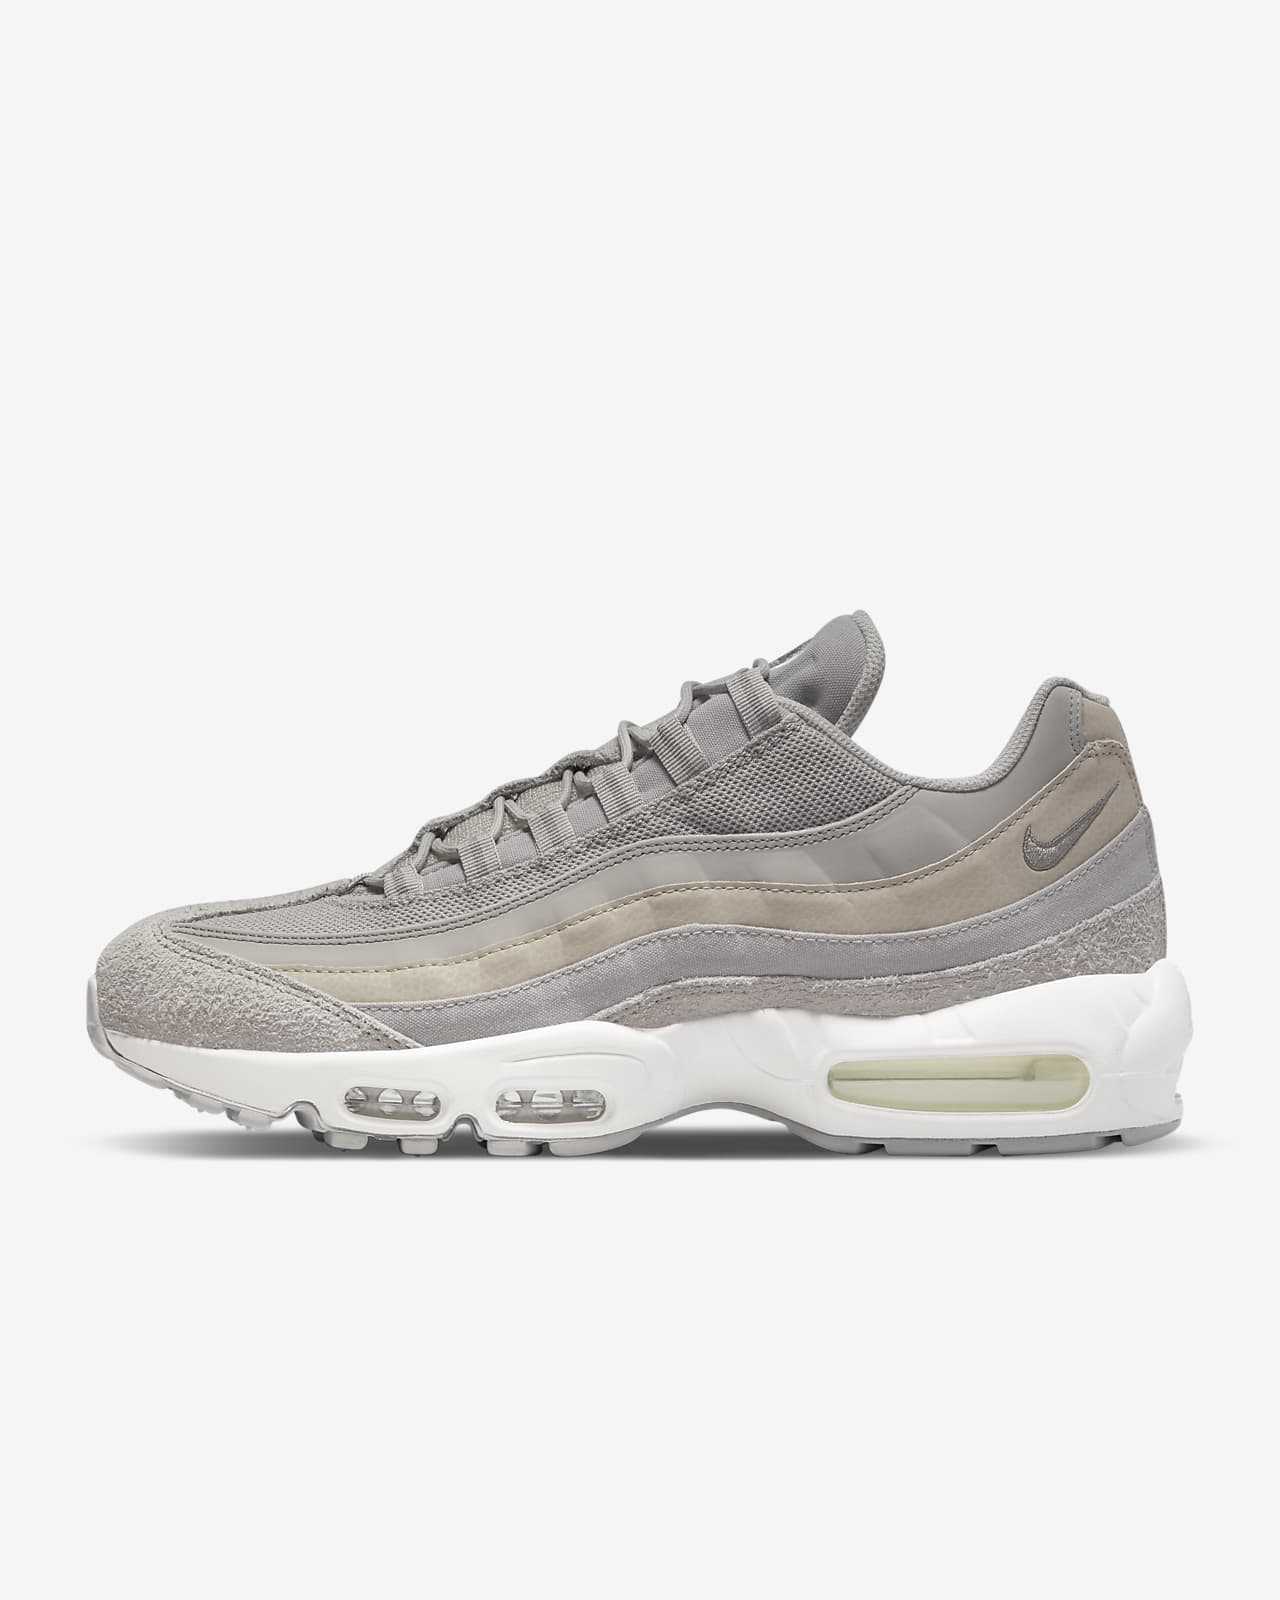 Chaussures Nike Air Max 95 SE pour Homme